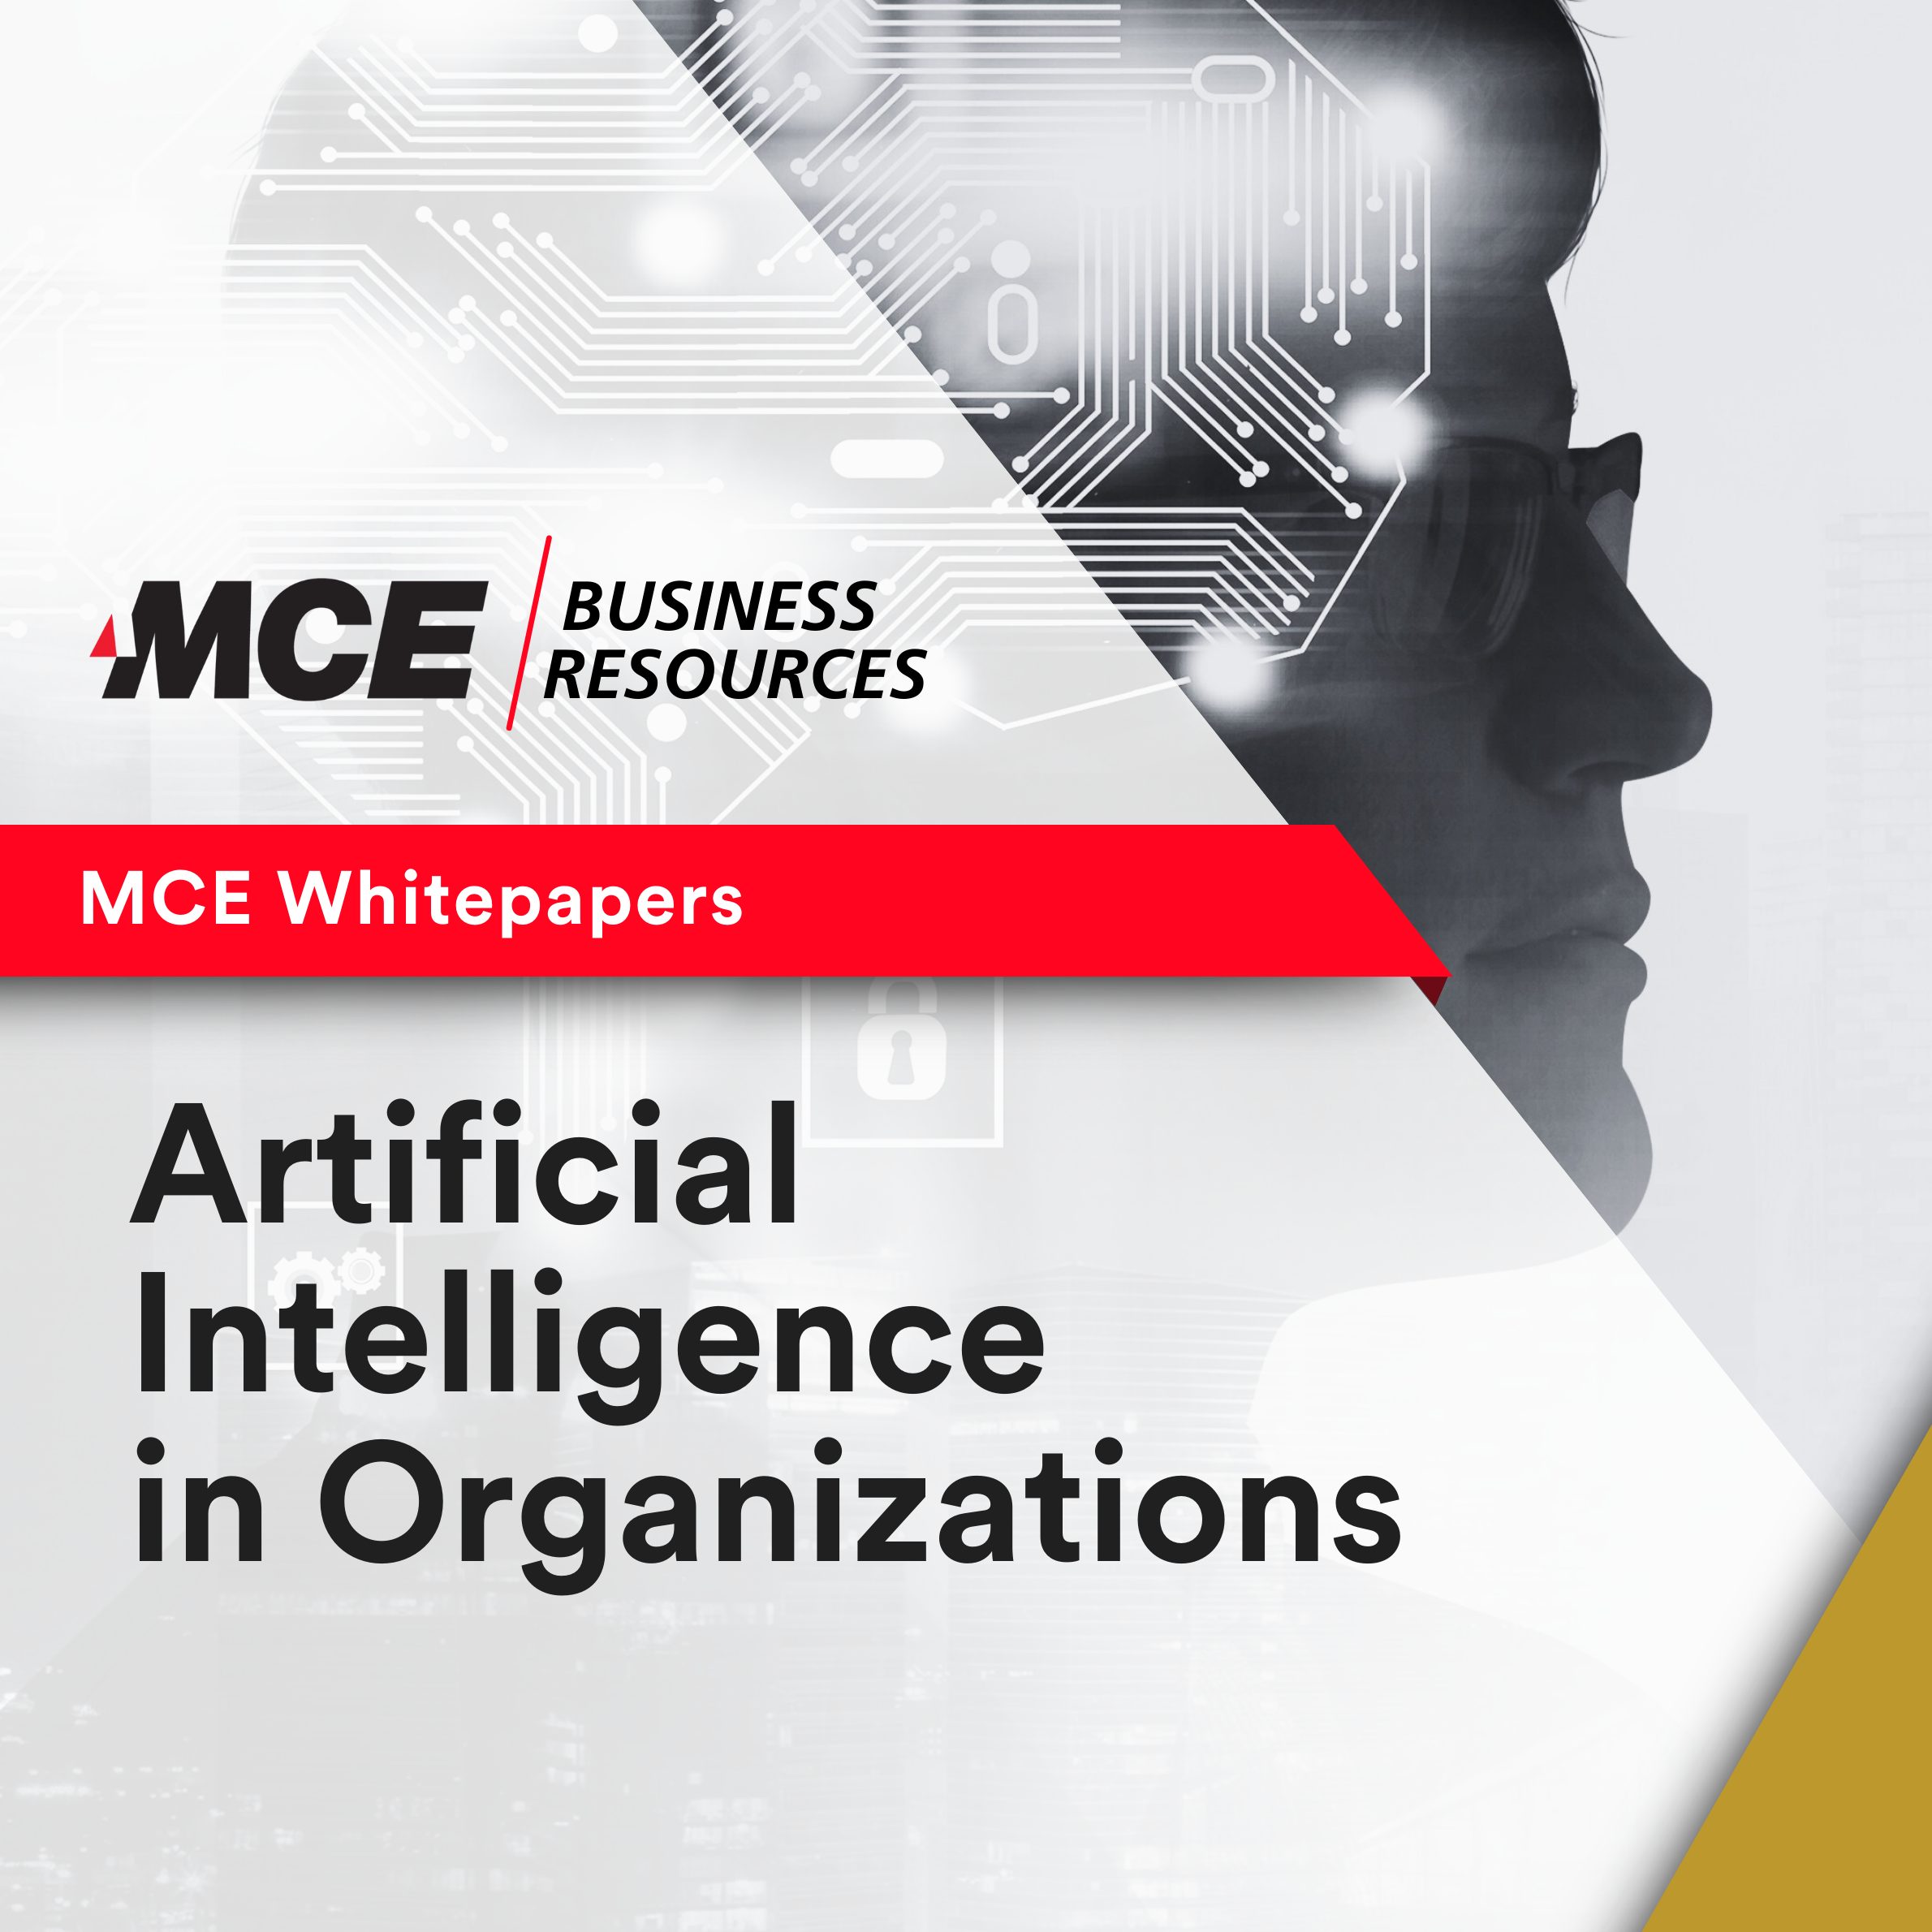 MCE Whitepaper: Artificial Intelligence in Organizations